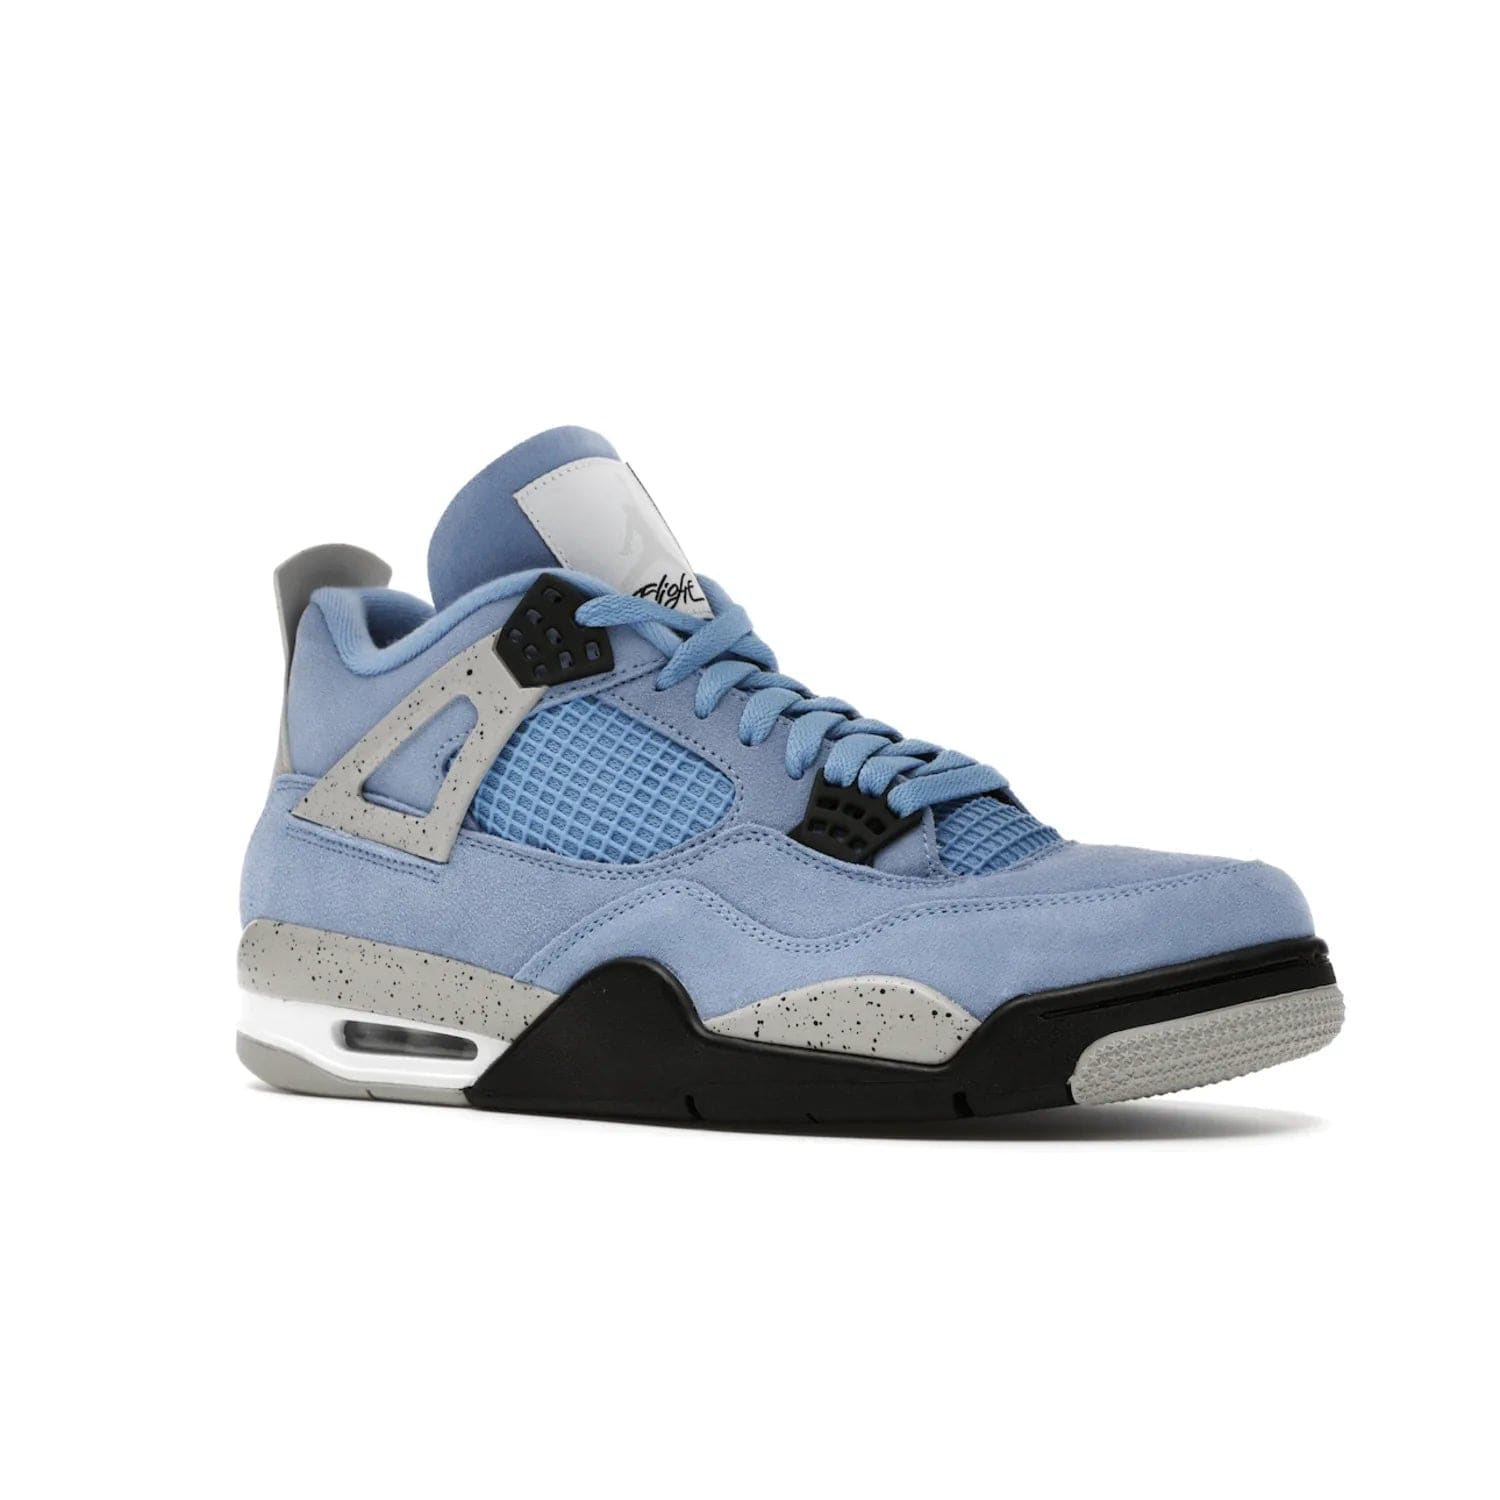 Jordan 4 Retro University Blue - Image 4 - Only at www.BallersClubKickz.com - The Air Jordan 4 University Blue honors MJ's alma mater. Rich University Blue suede, panels of netting, and Cement Grey speckled eyelets give this design an edgy look. Features a black, white and Tech Grey sole with a clear Air unit and two woven labels on the tongue. Jumpman logo & Team Jordan jock tag included. Released April 2021.